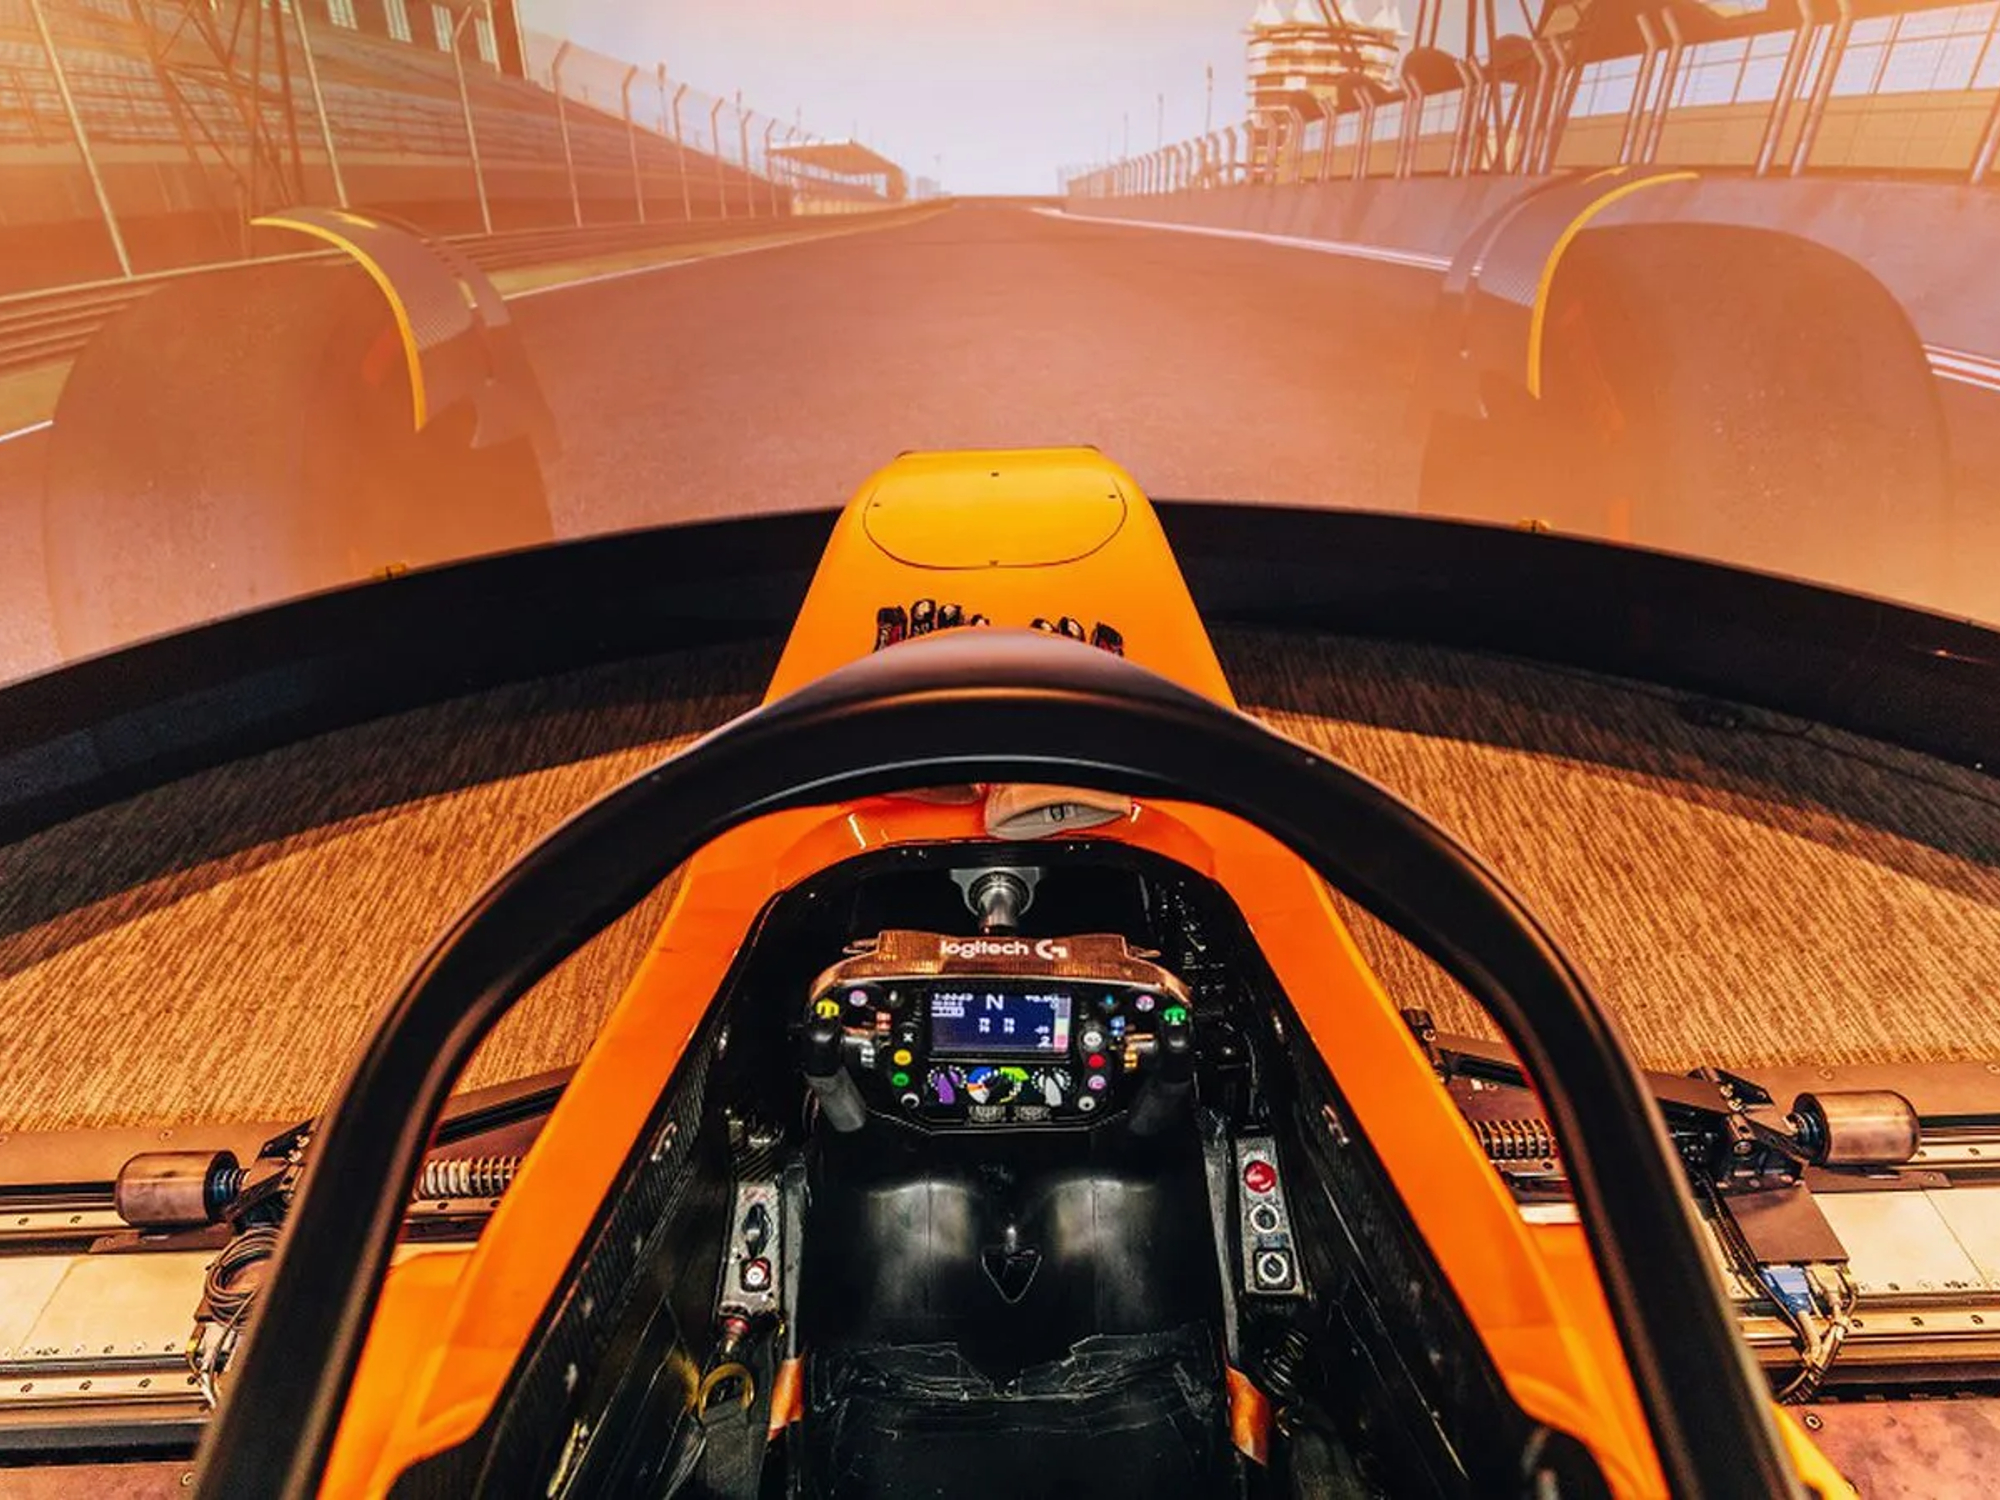 https://www.themanual.com/wp-content/uploads/sites/9/2023/10/McLaren-F1-racing-simulator-drivers-view-from-inside-the-simulator.jpg?fit=2000%2C1500&p=1